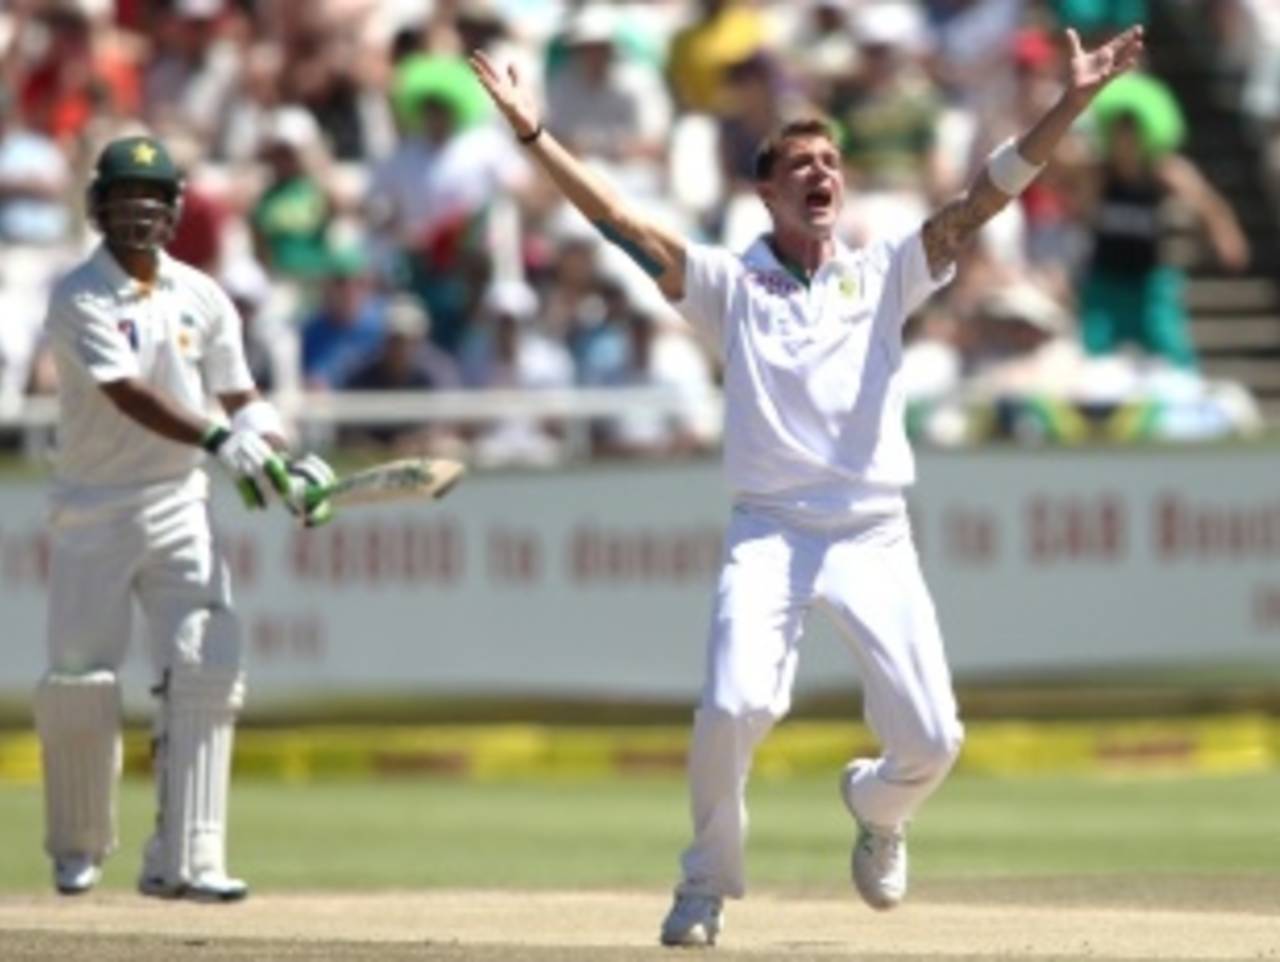 Dale Steyn appeals against Mohammad Hafeez, South Africa v Pakistan, 2nd Test, Cape Town, 3rd day, February 16, 2013